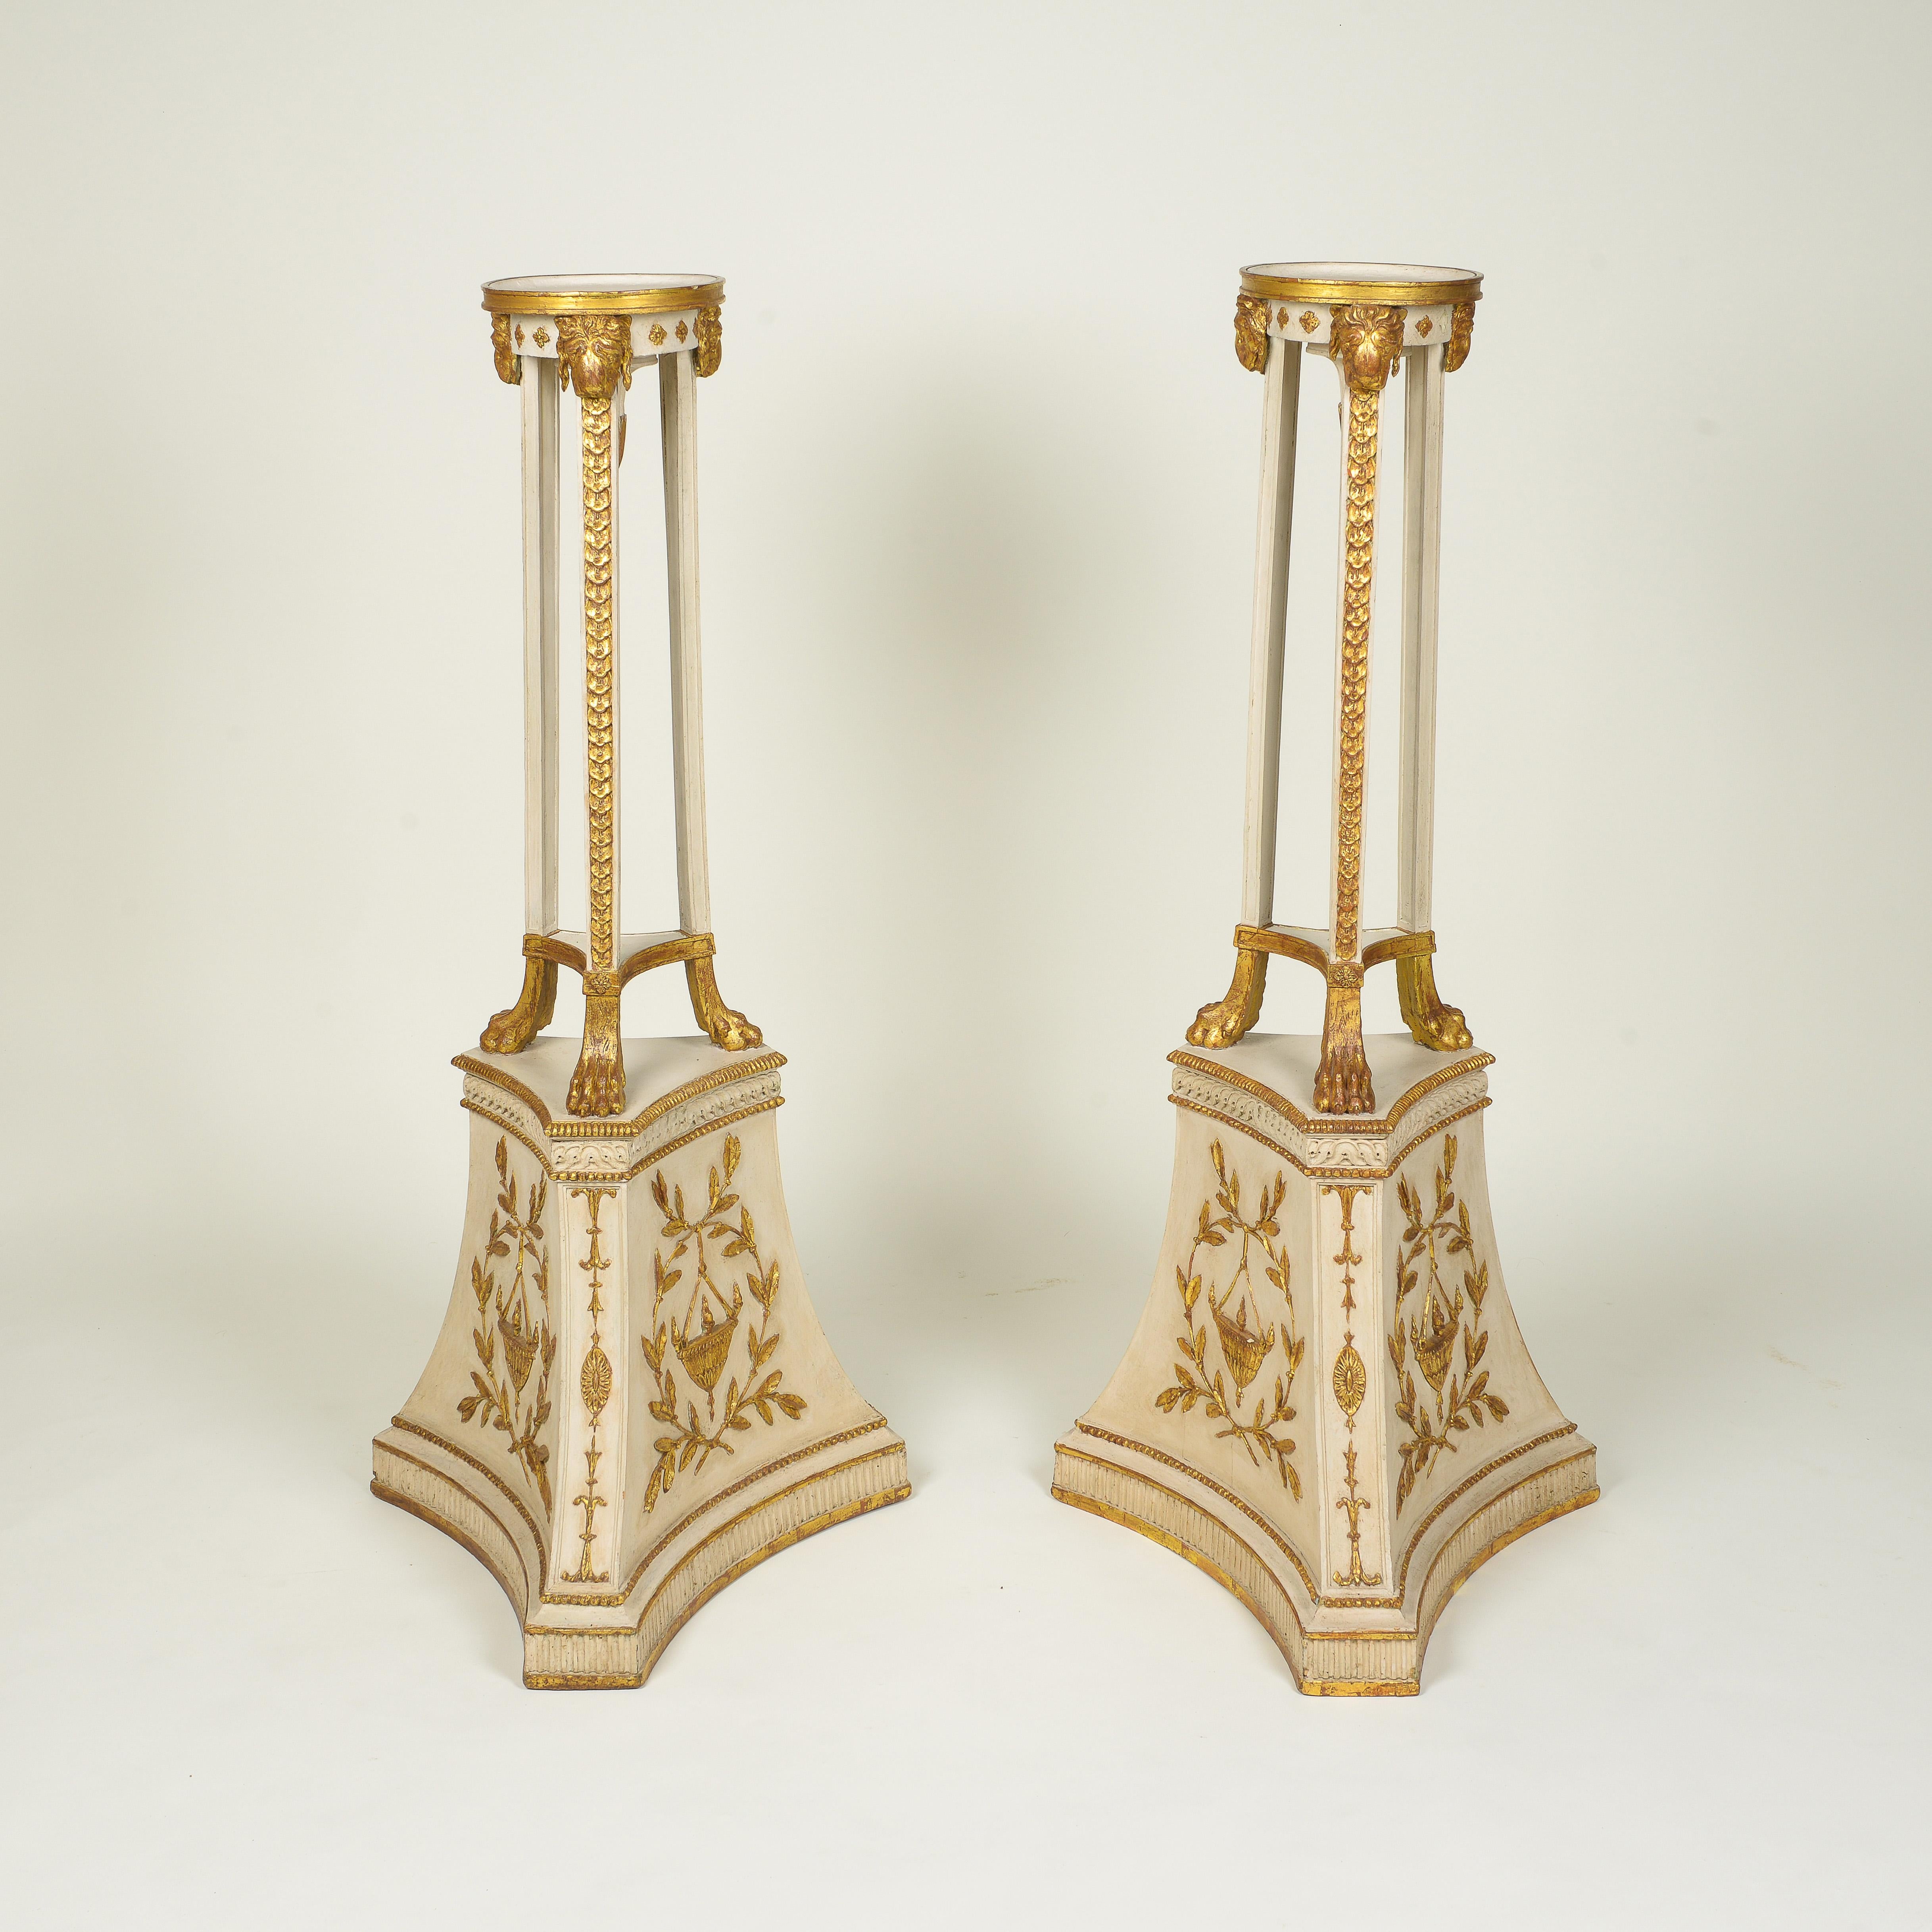 Each with round gilt-edged platform supported on three square legs with guilloche decoration, headed by lion's masks and terminating in paw feet; on a tripartite spreading base with gilt low-relief laurel wreaths encircling pendant urns; with